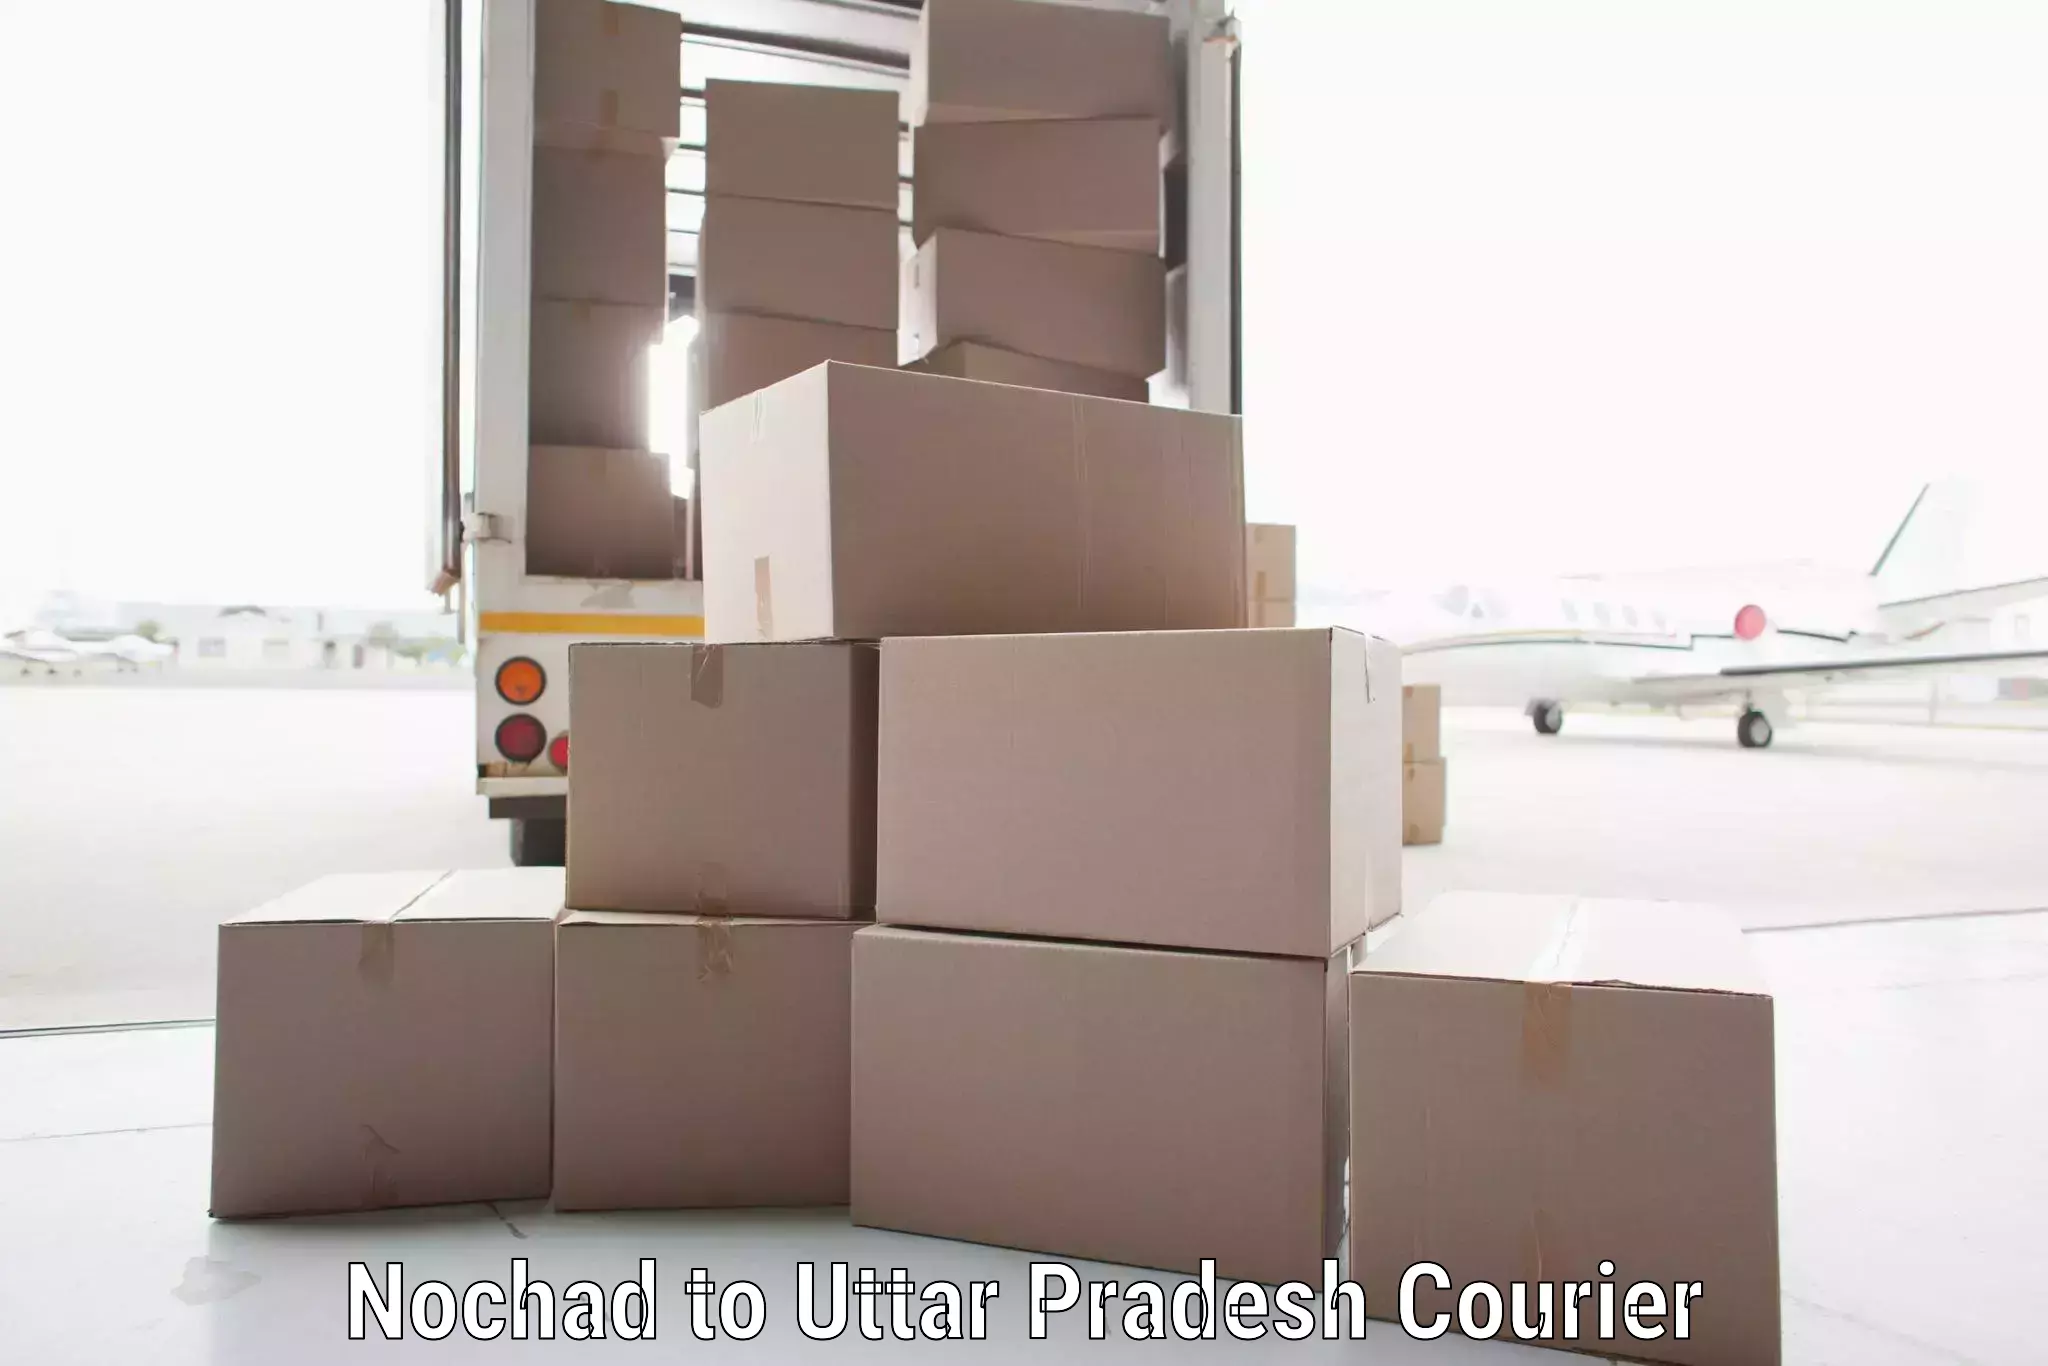 Advanced tracking systems Nochad to Noida